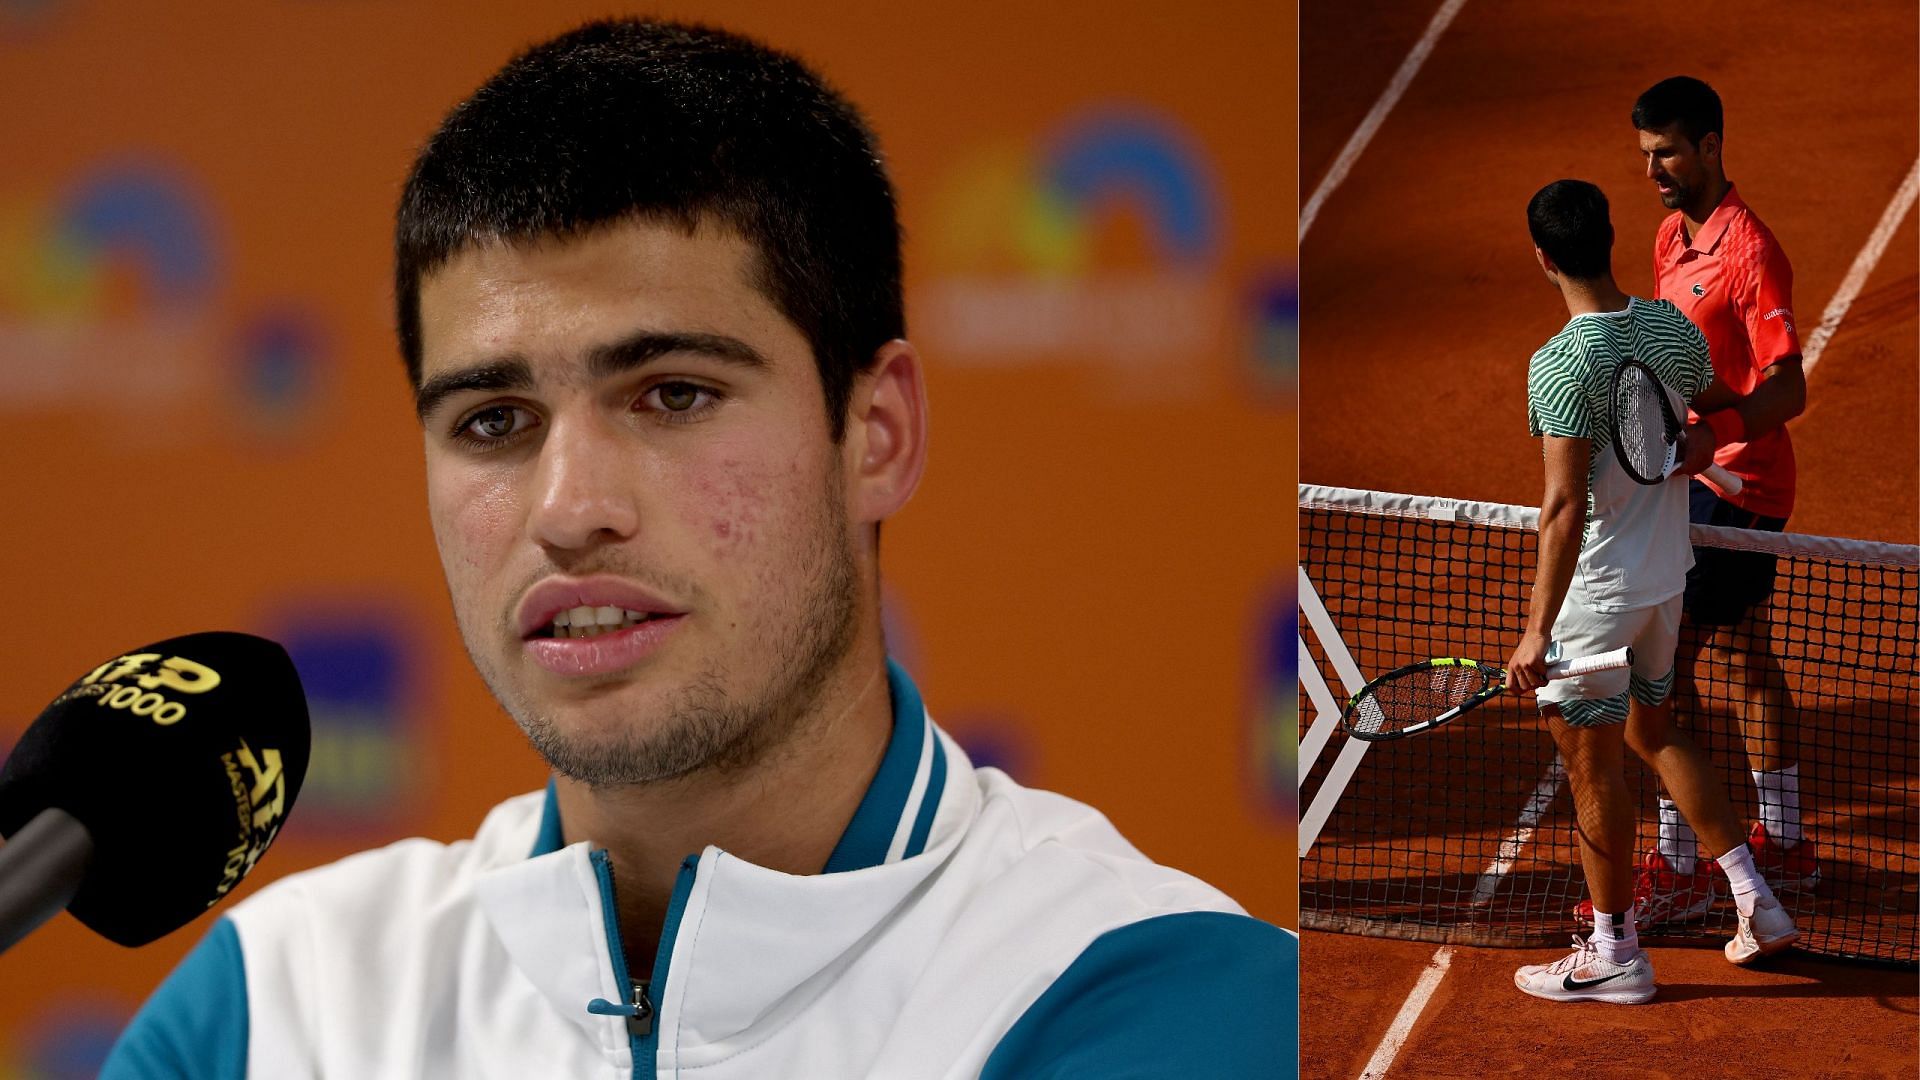 Carlos Alcaraz has defended Novak Djokovic after he was accused of excessive celebrations.